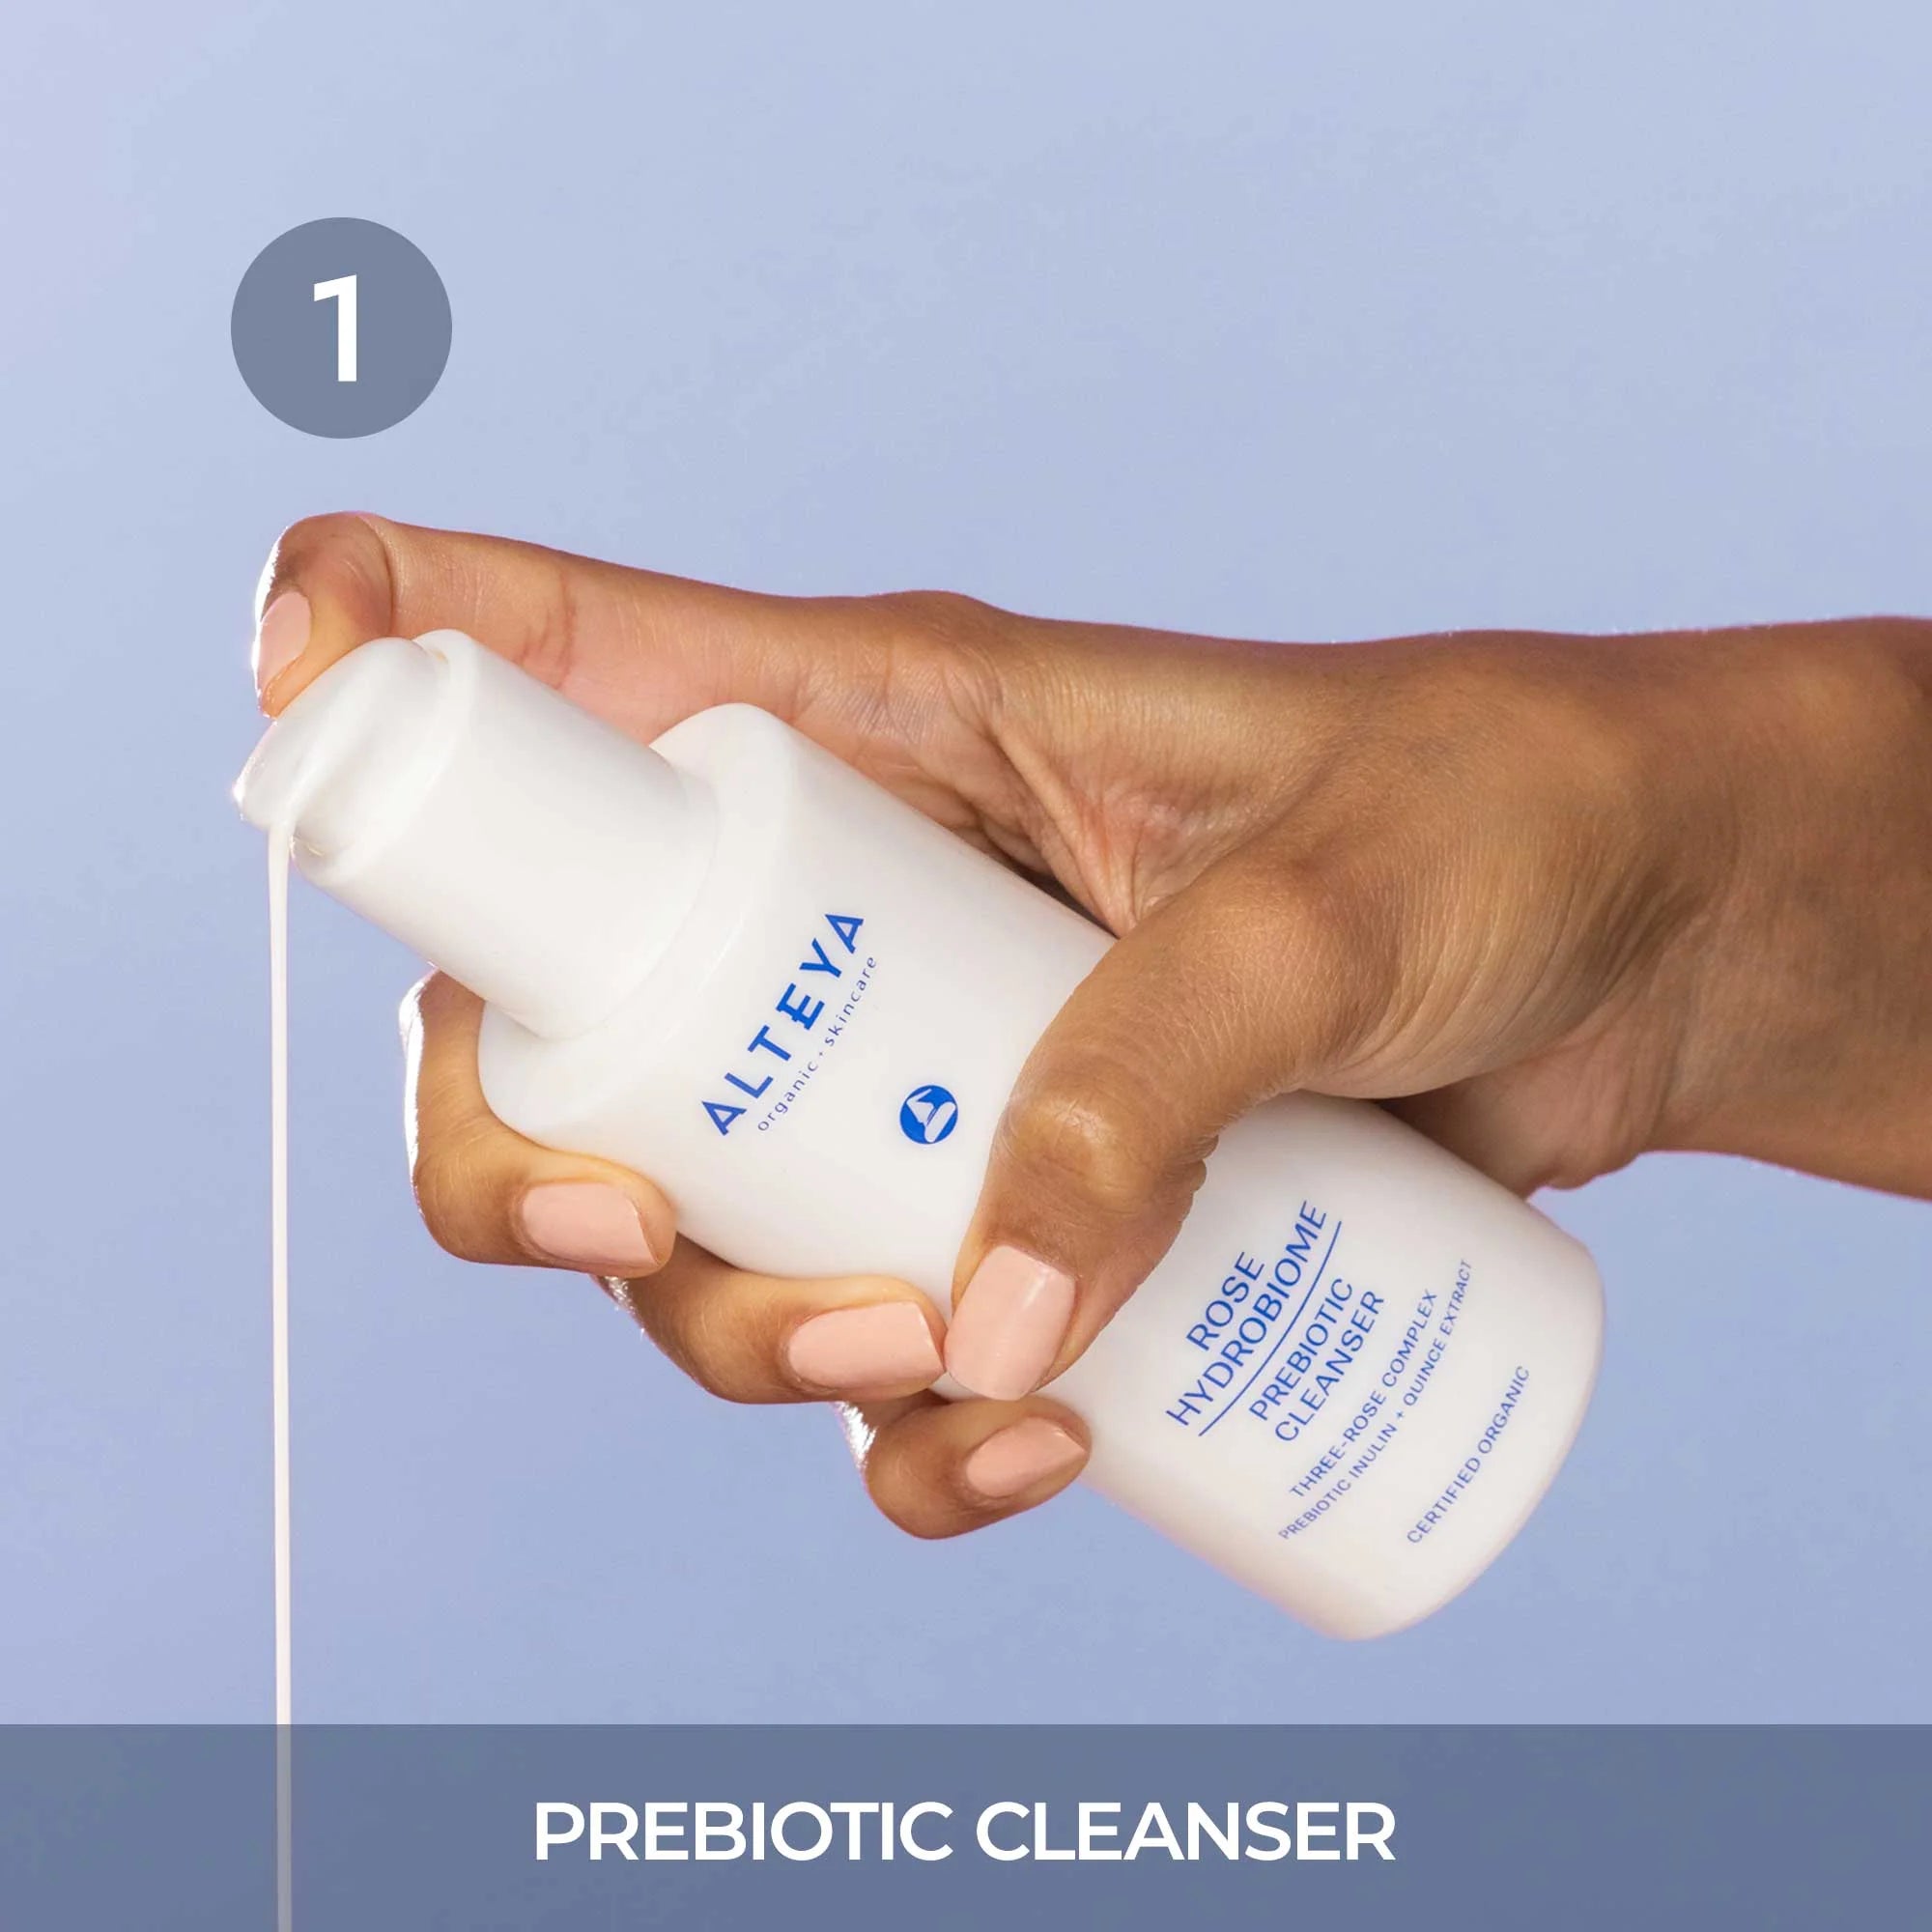 A hand holding a bottle of prebiotic cleanser.